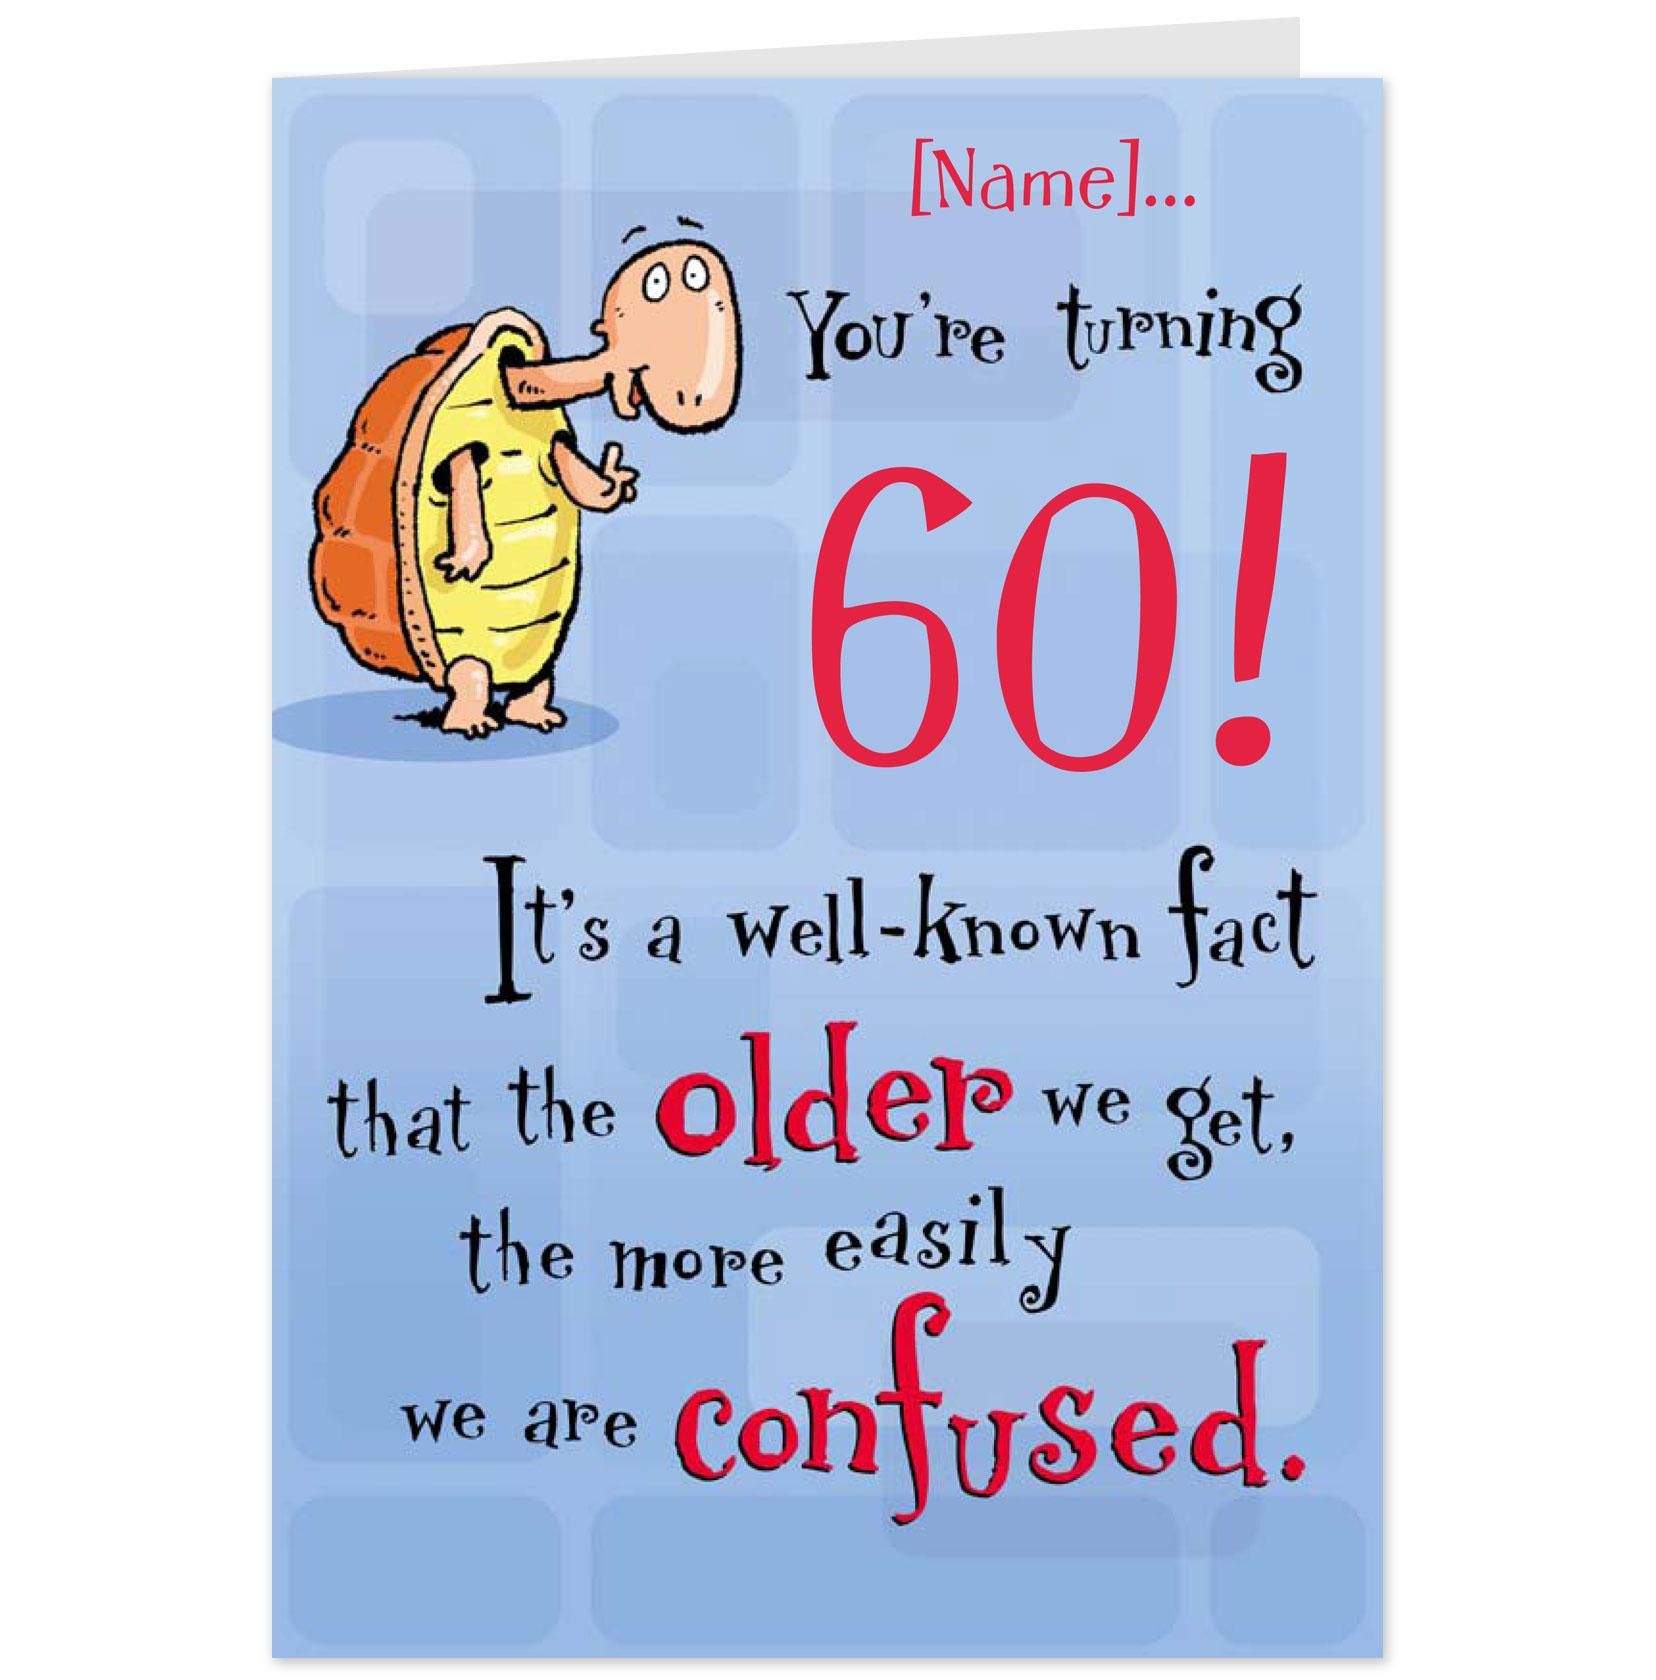 Funny Birthday Card Quotes
 Greeting Card Funny Quotes QuotesGram